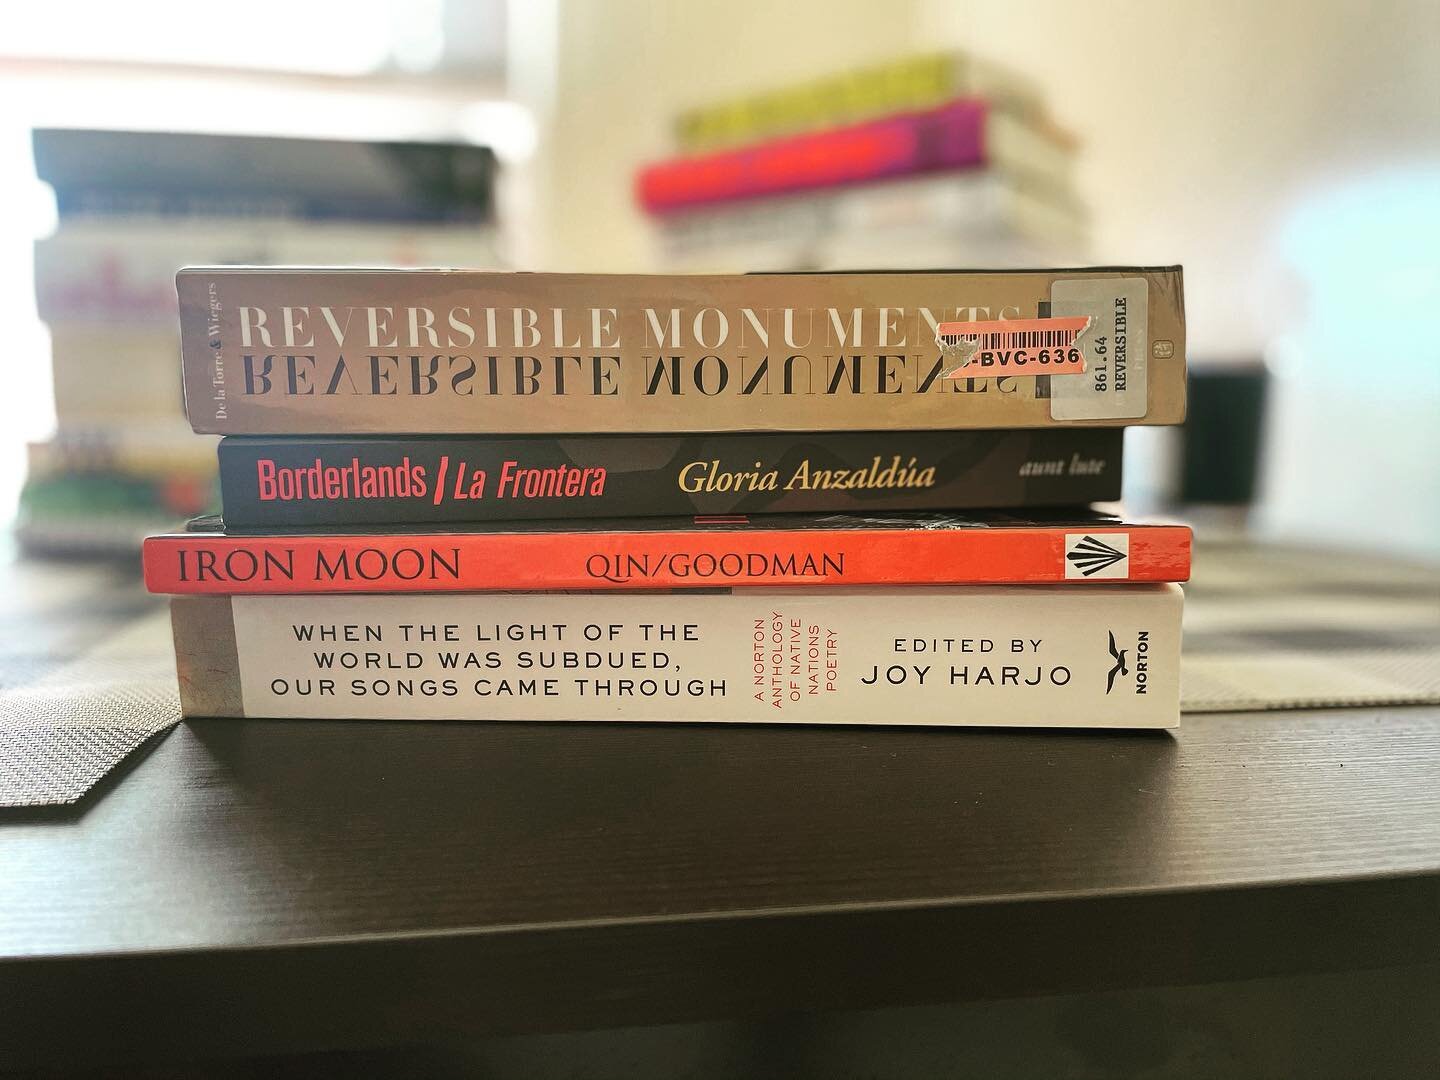 The best time to make room for voices that have been historically and systemically silenced is all the time, always. ⁣
⁣
What are some books, poetry or otherwise, that have helped you along the ever-progressing journey of decolonizing your bookshelf?